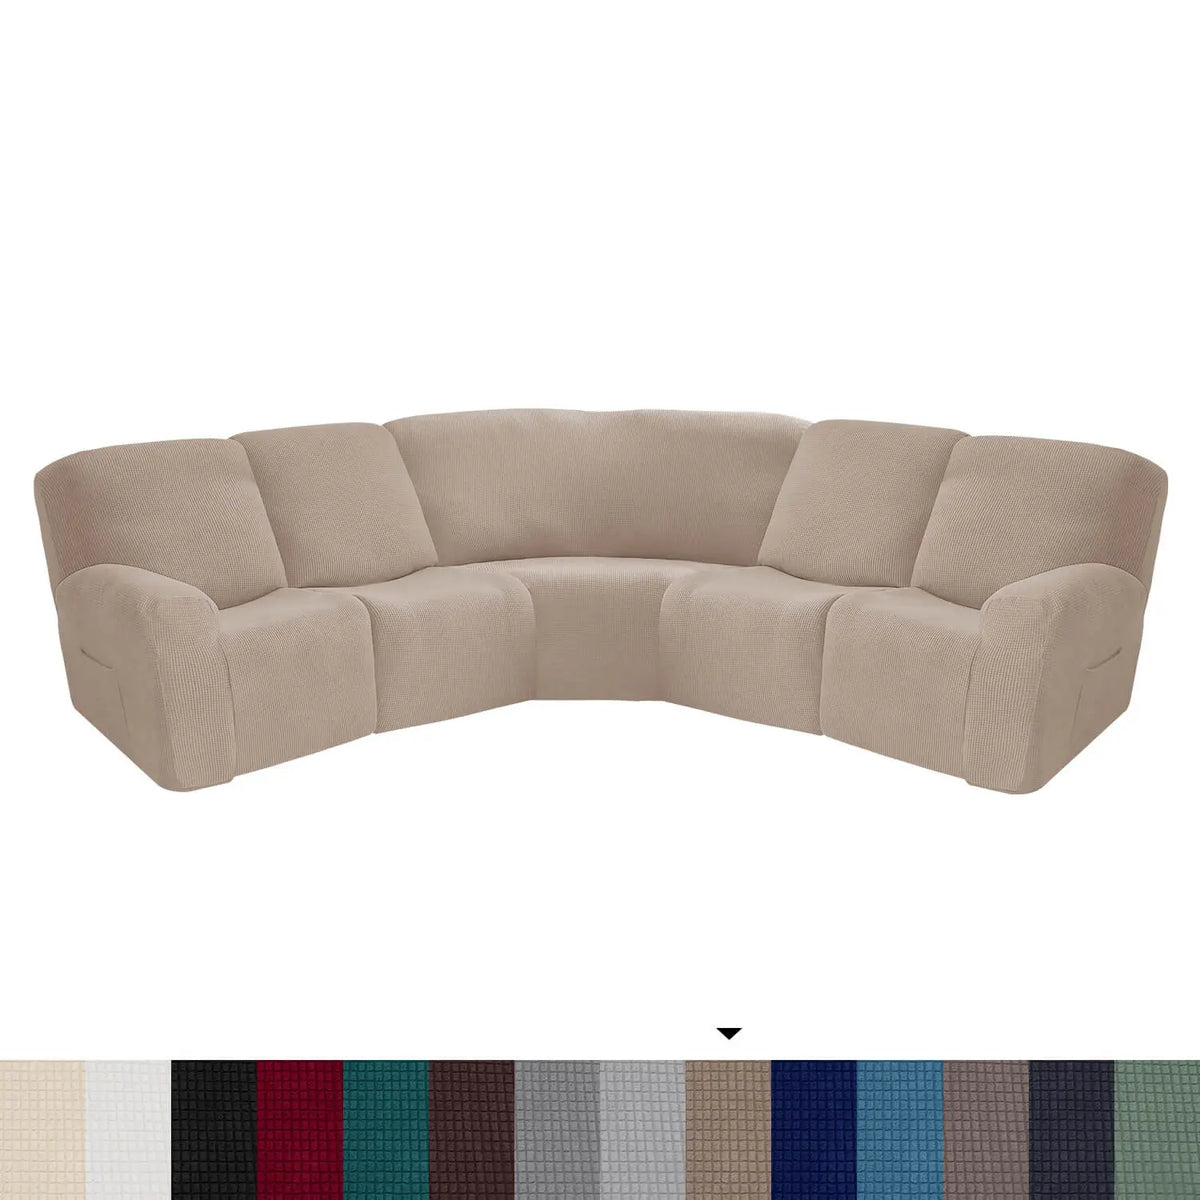 Crfatop L Shape Sectional Recliner Sofa Covers Corner Couch Covers Khaki